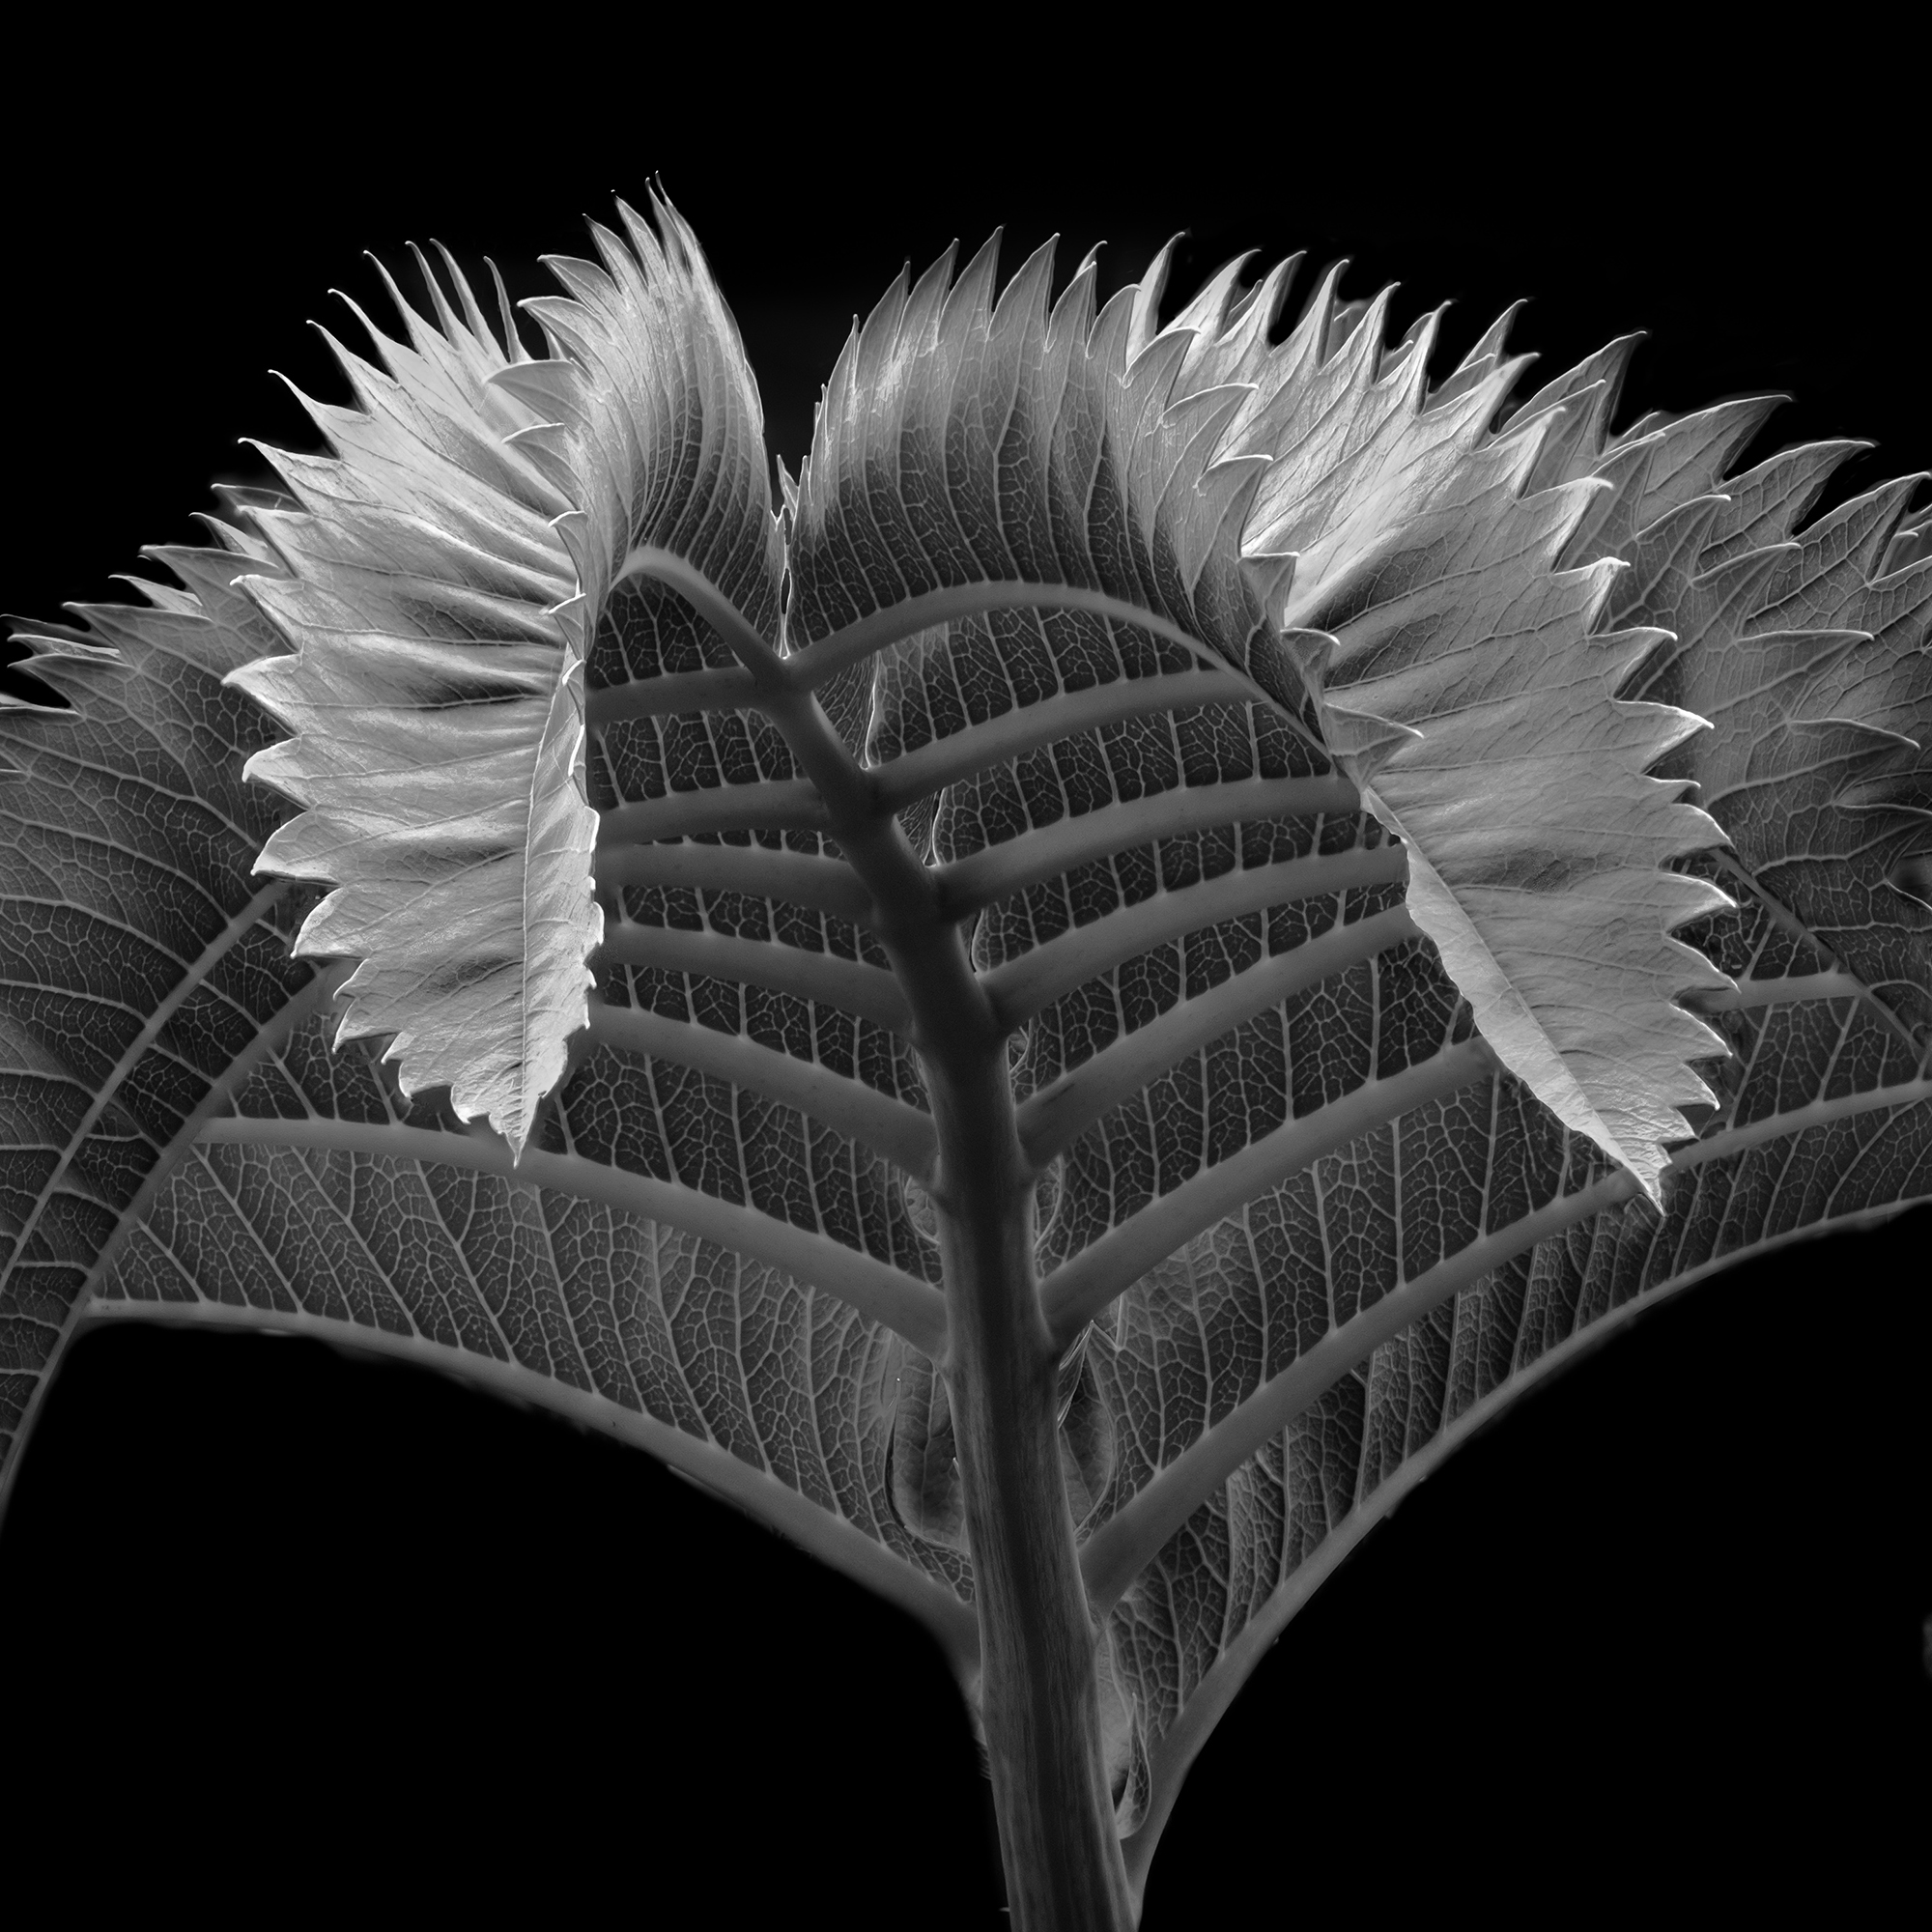 06 Melianthus Major By Mark Reeves ARPS